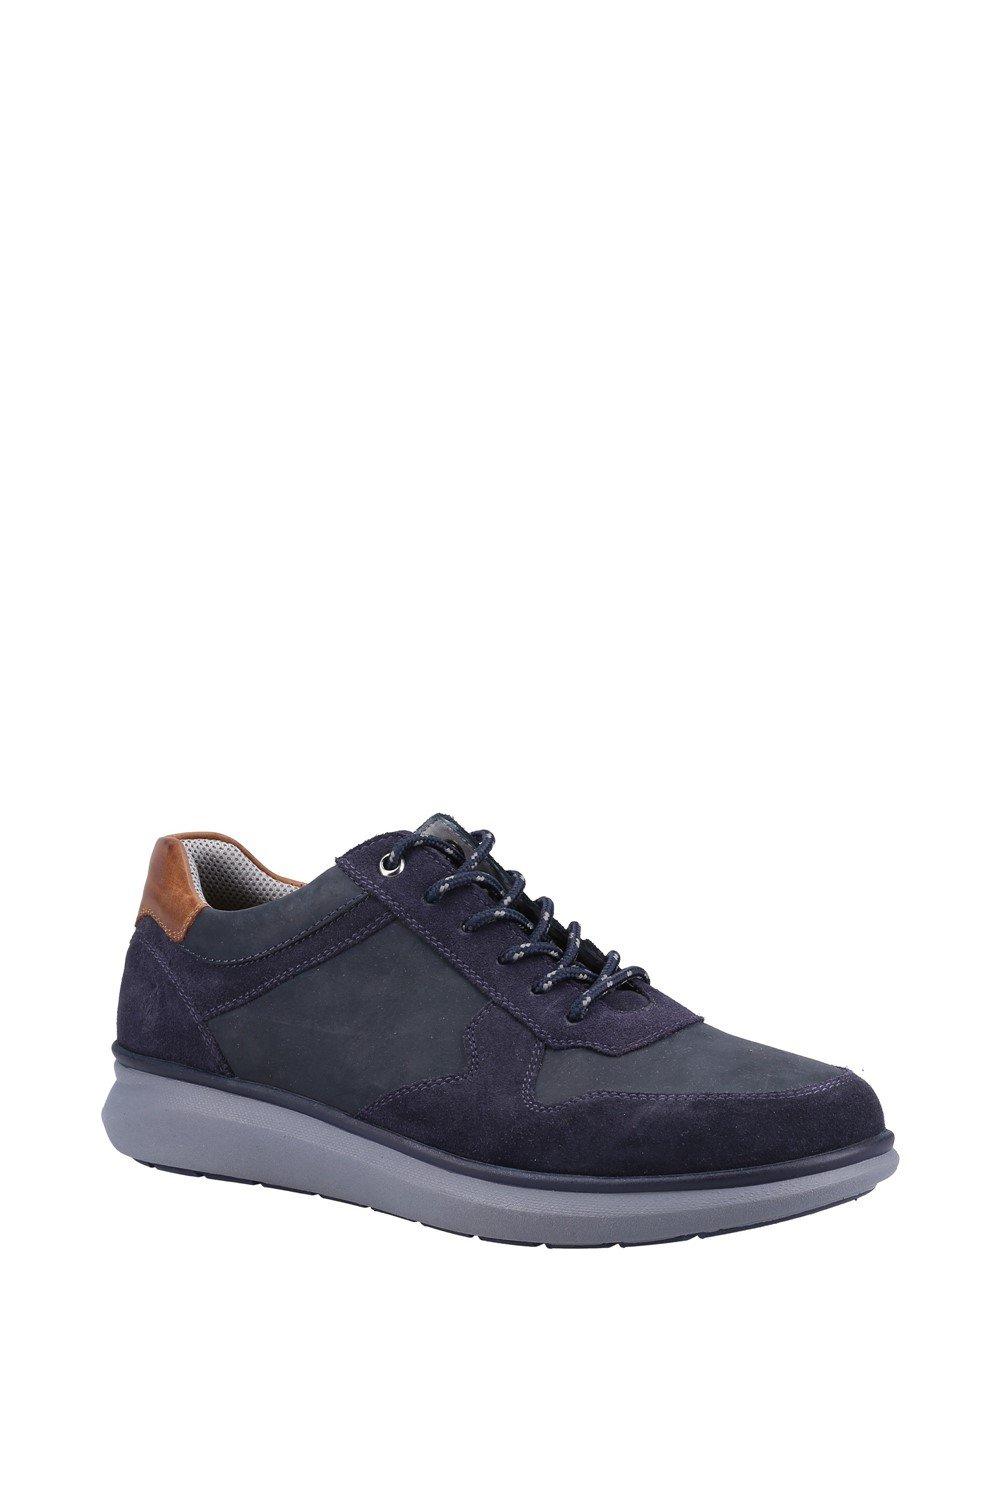 Shoes | 'Braxton' Sneakers | Hush Puppies